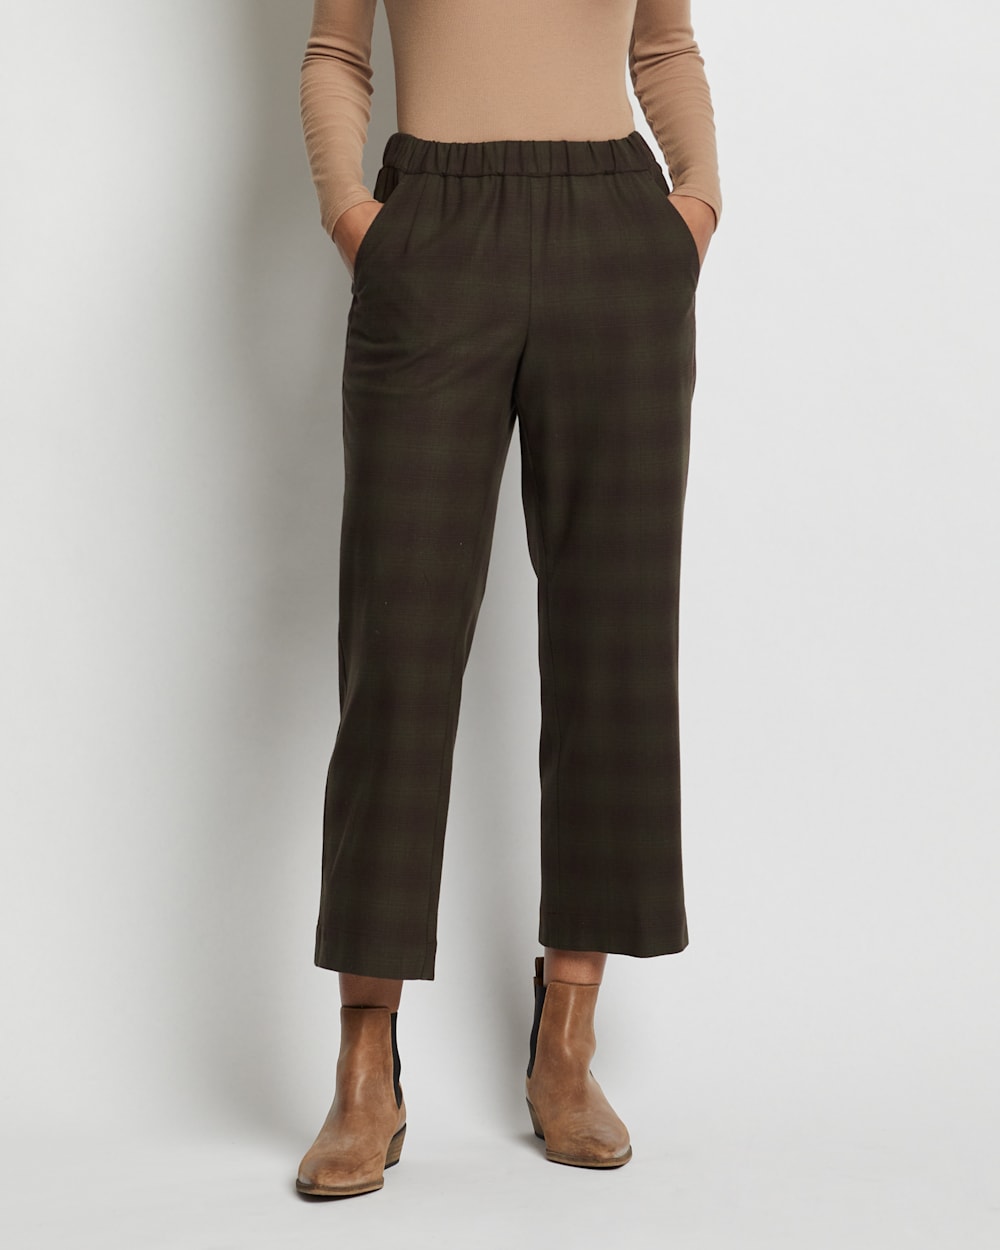 WOMEN'S BROADWAY MERINO PLAID PANTS IN OLIVE SHADOW image number 1